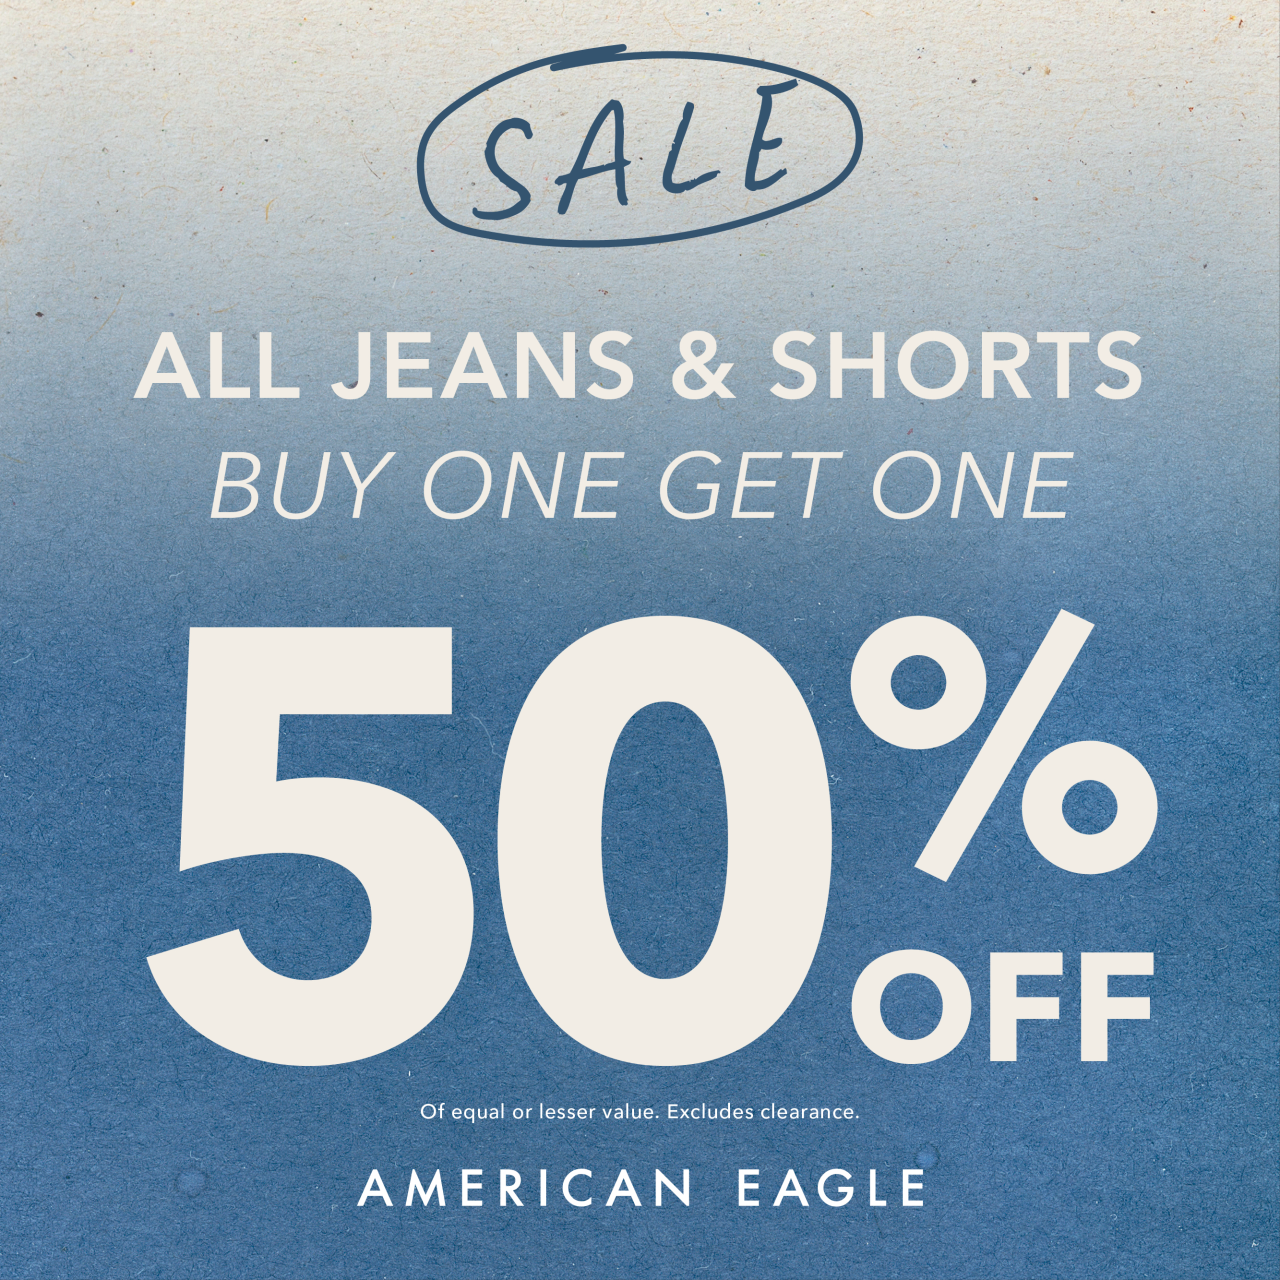 2 American Eagle Outfitters Campaign 50 Thurs 3.28 Weds 4.3 ML American Eagle All Jeans Shorts Buy One Get One 50 OffTops starting at 11.9914.99 EN 1280x1280 1